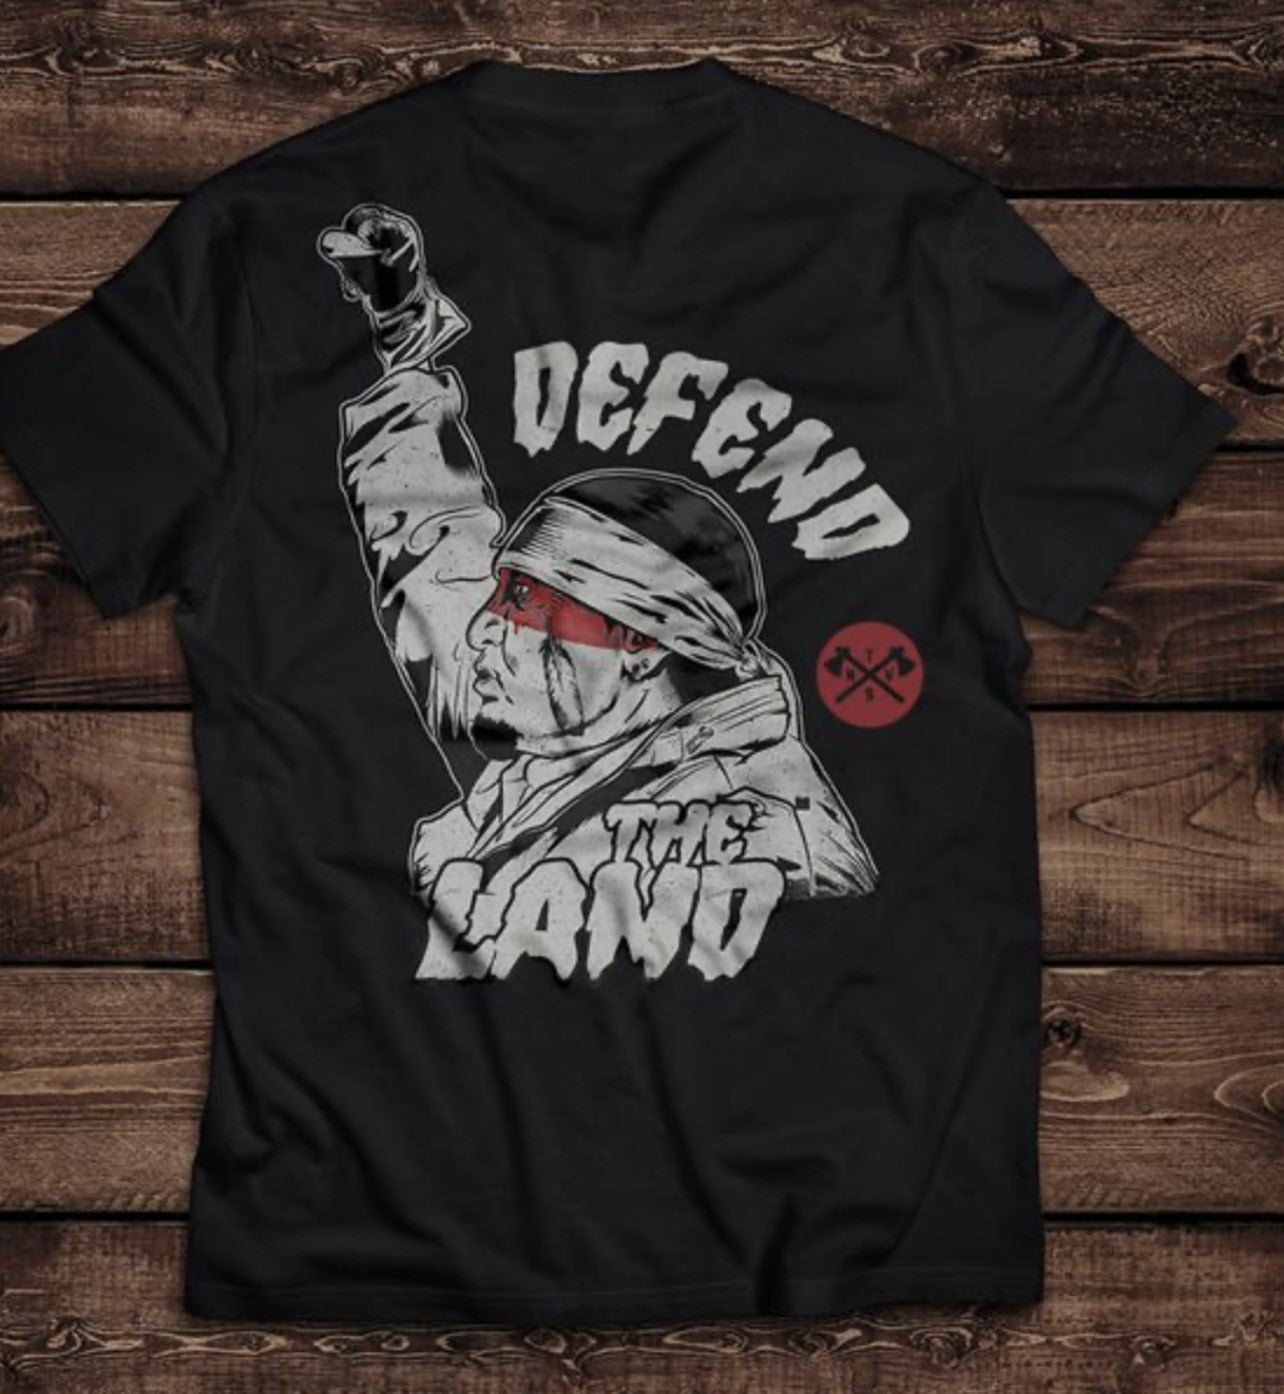 Defend The Land Tee